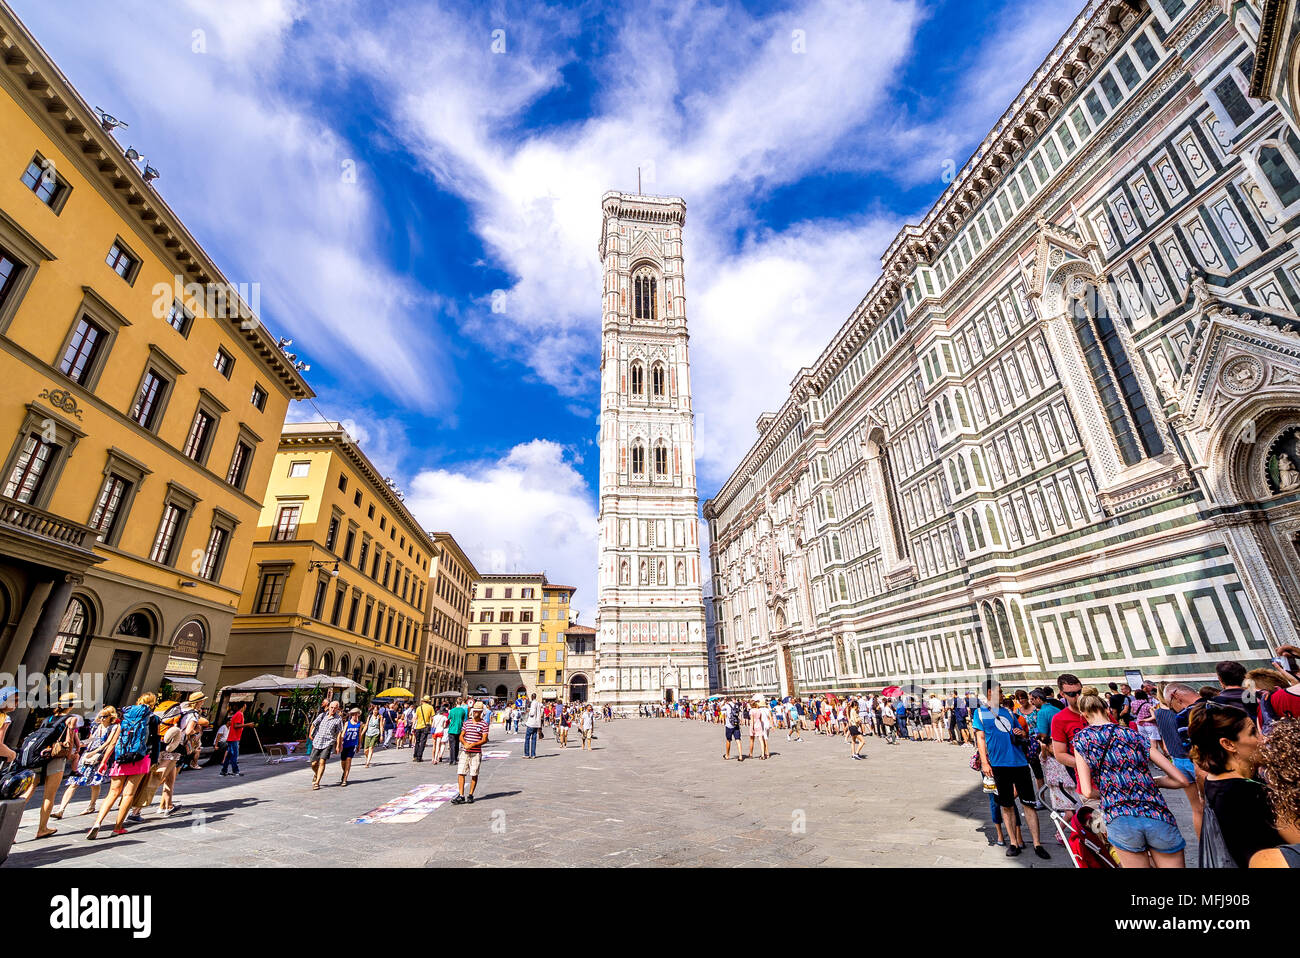 Giotto's bell tower, also known as the Campanile is part of the Cattedrale di Santa Maria del Fiore, or Florence Cathedral in Florence, Italy. Stock Photo